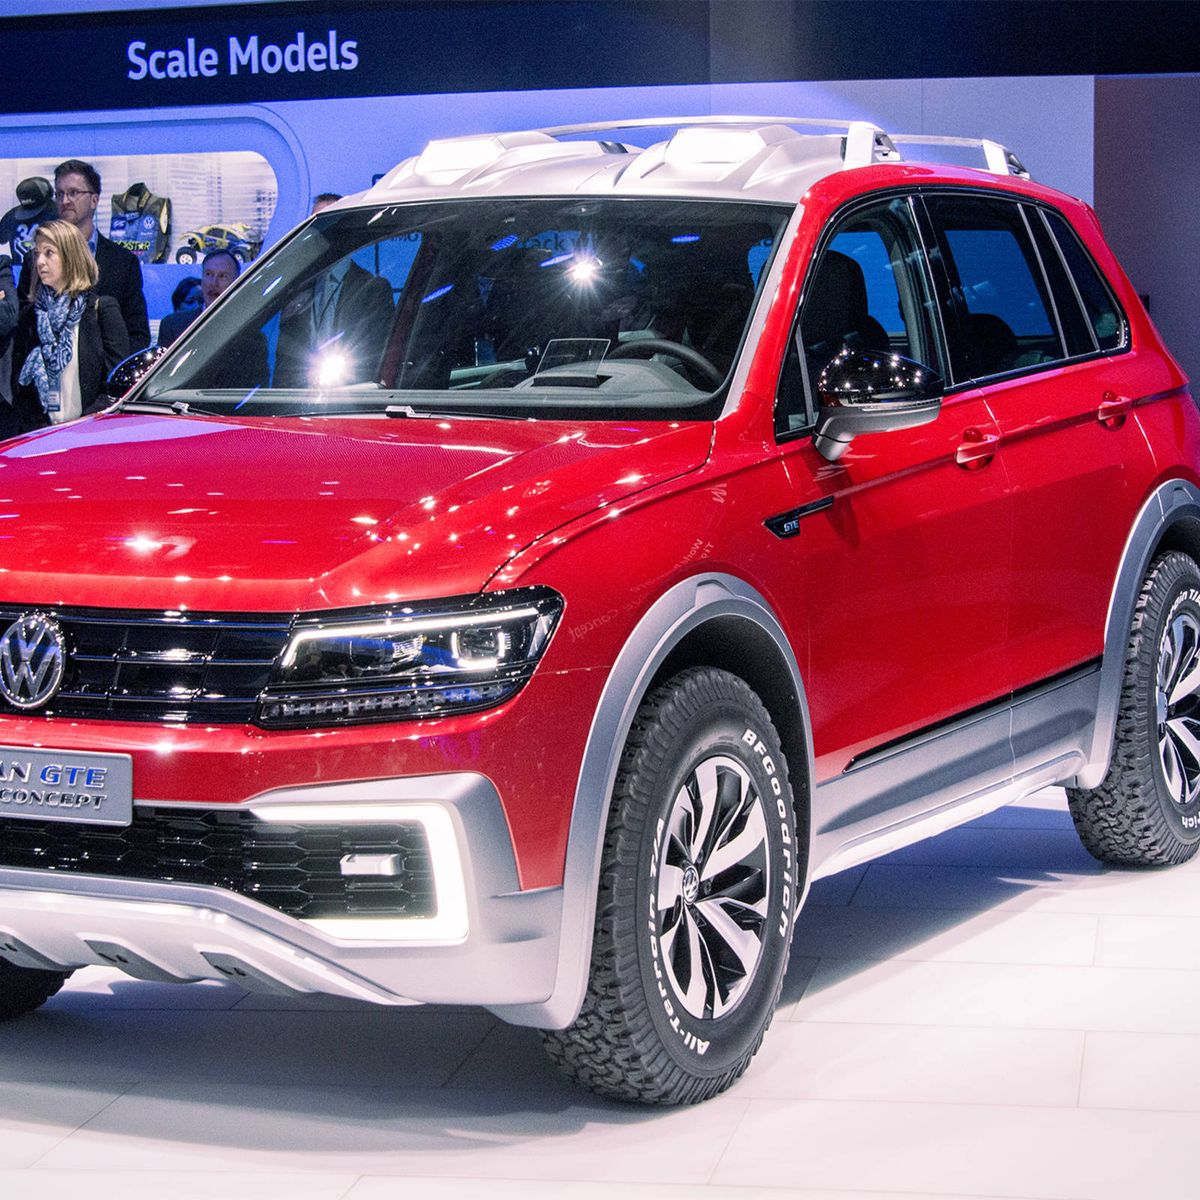 2022 VW Tiguan makes U.S. debut with added tech, classier styling